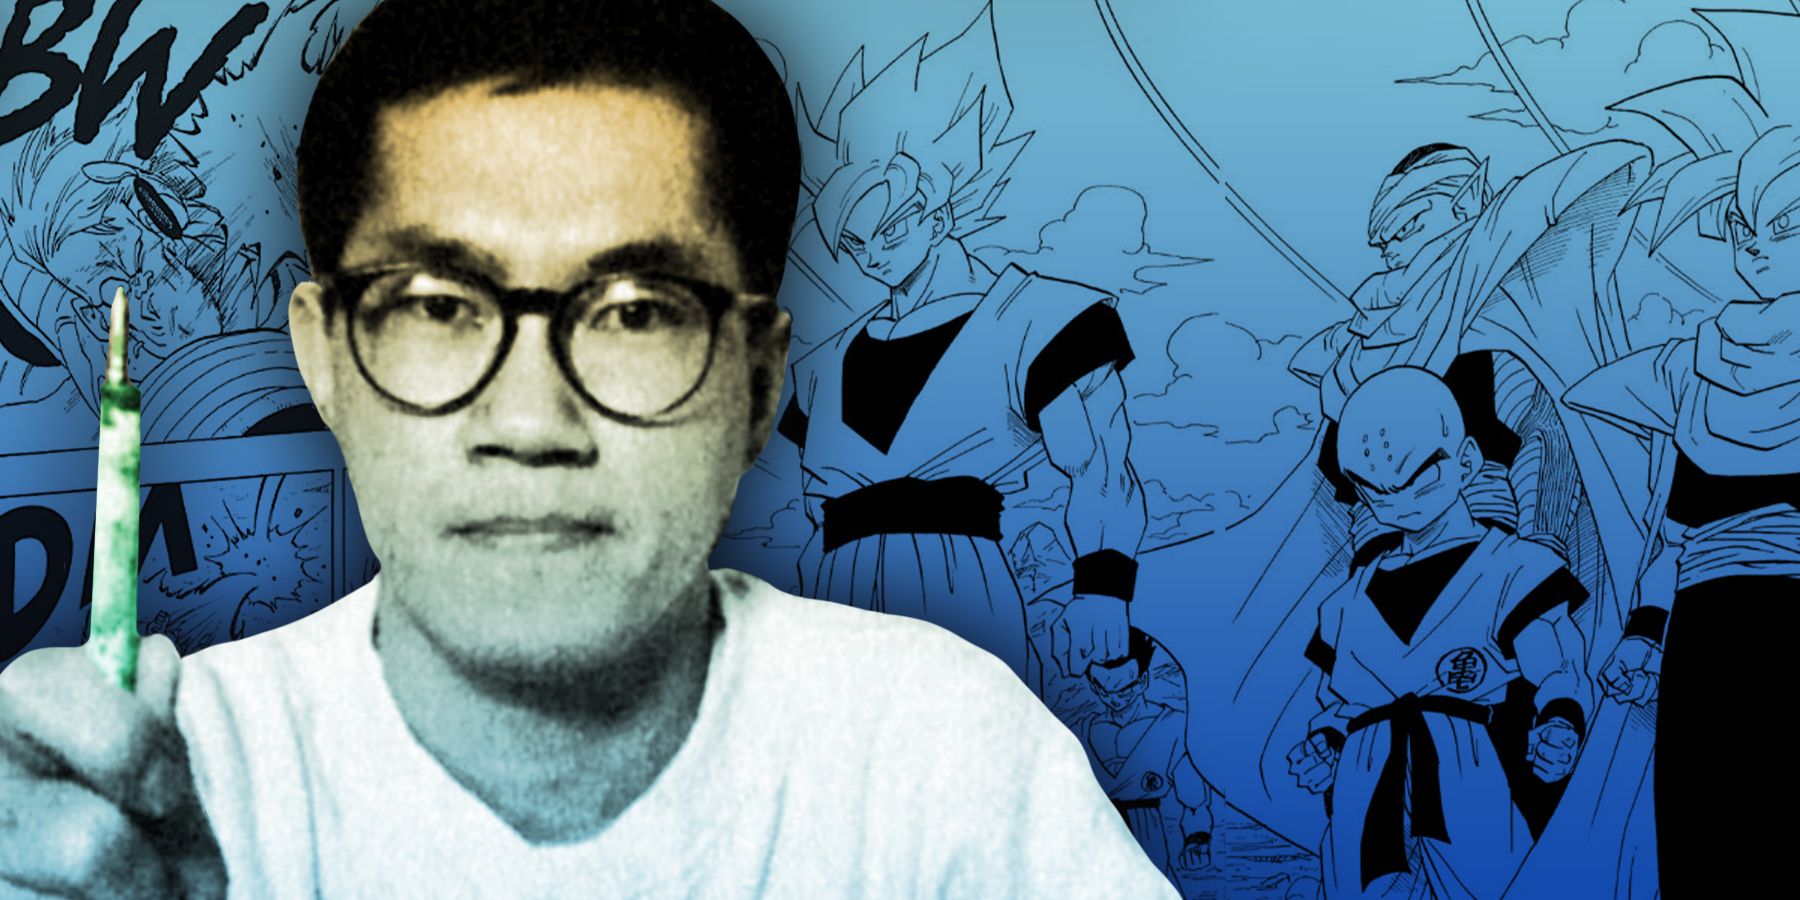 On the right, a young Akira Toriyama holds up his trusty drawing pen and smiles. Behind him, a manga illustration if Goku and friends poses.